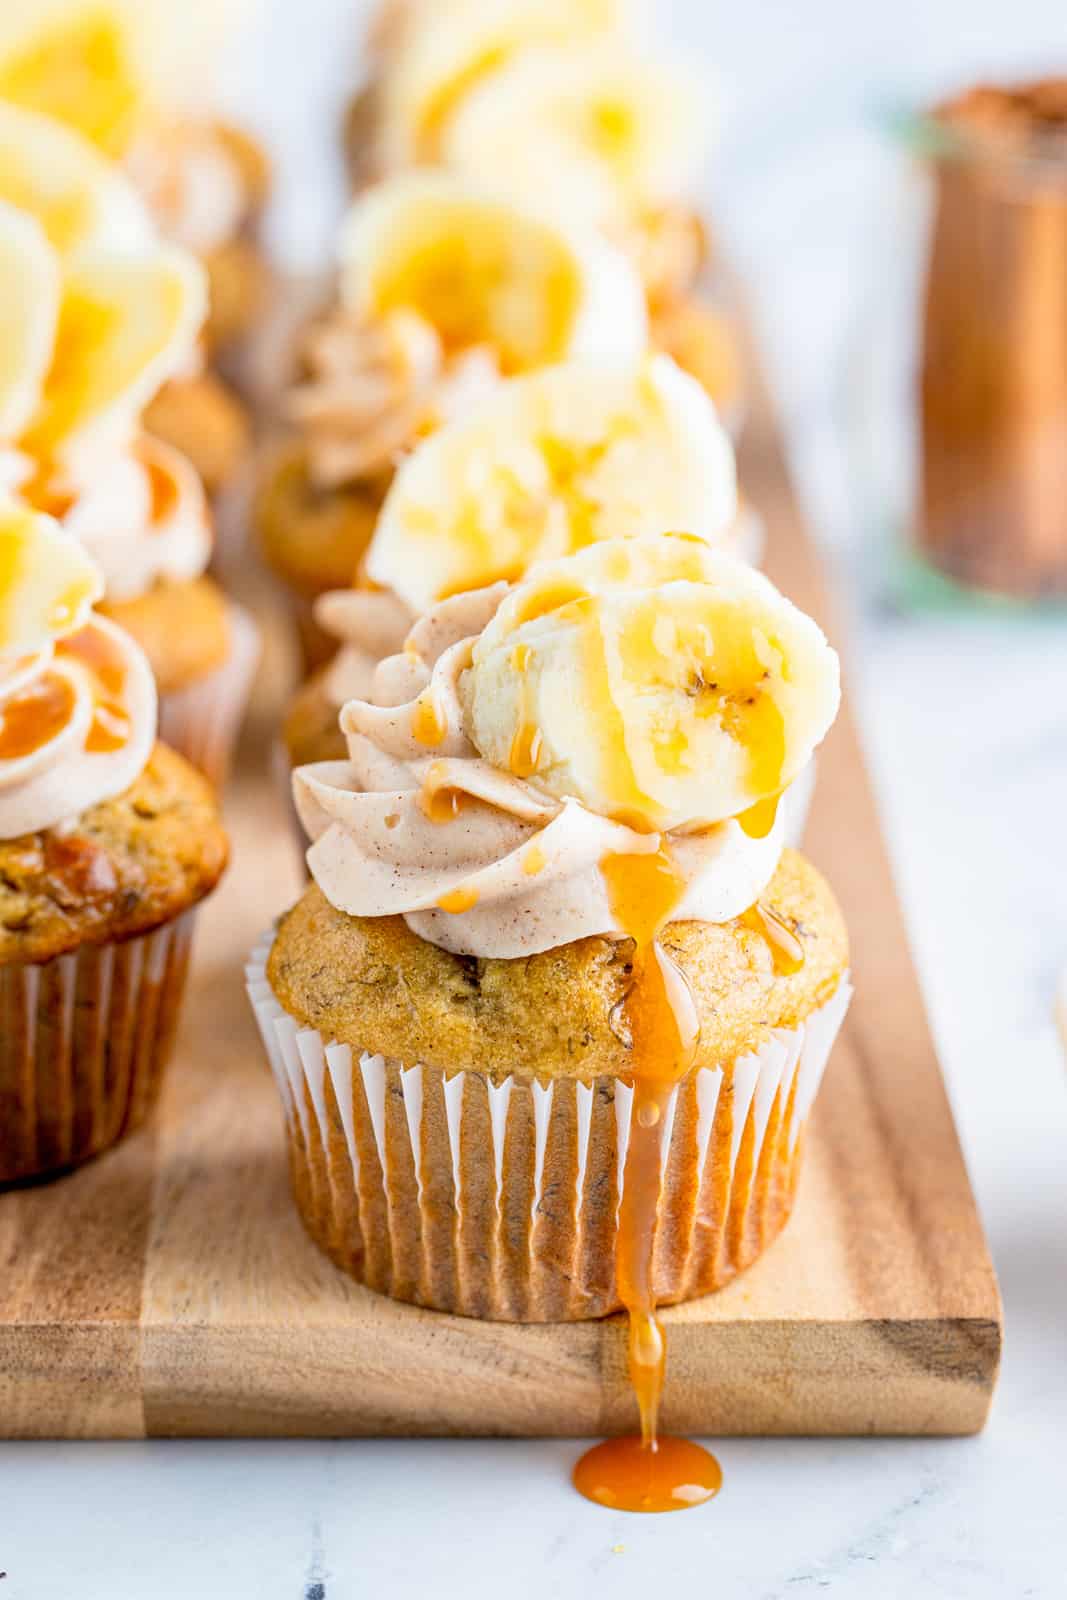 Banana Cupcakes on wooden board with caramel drizzling down side.